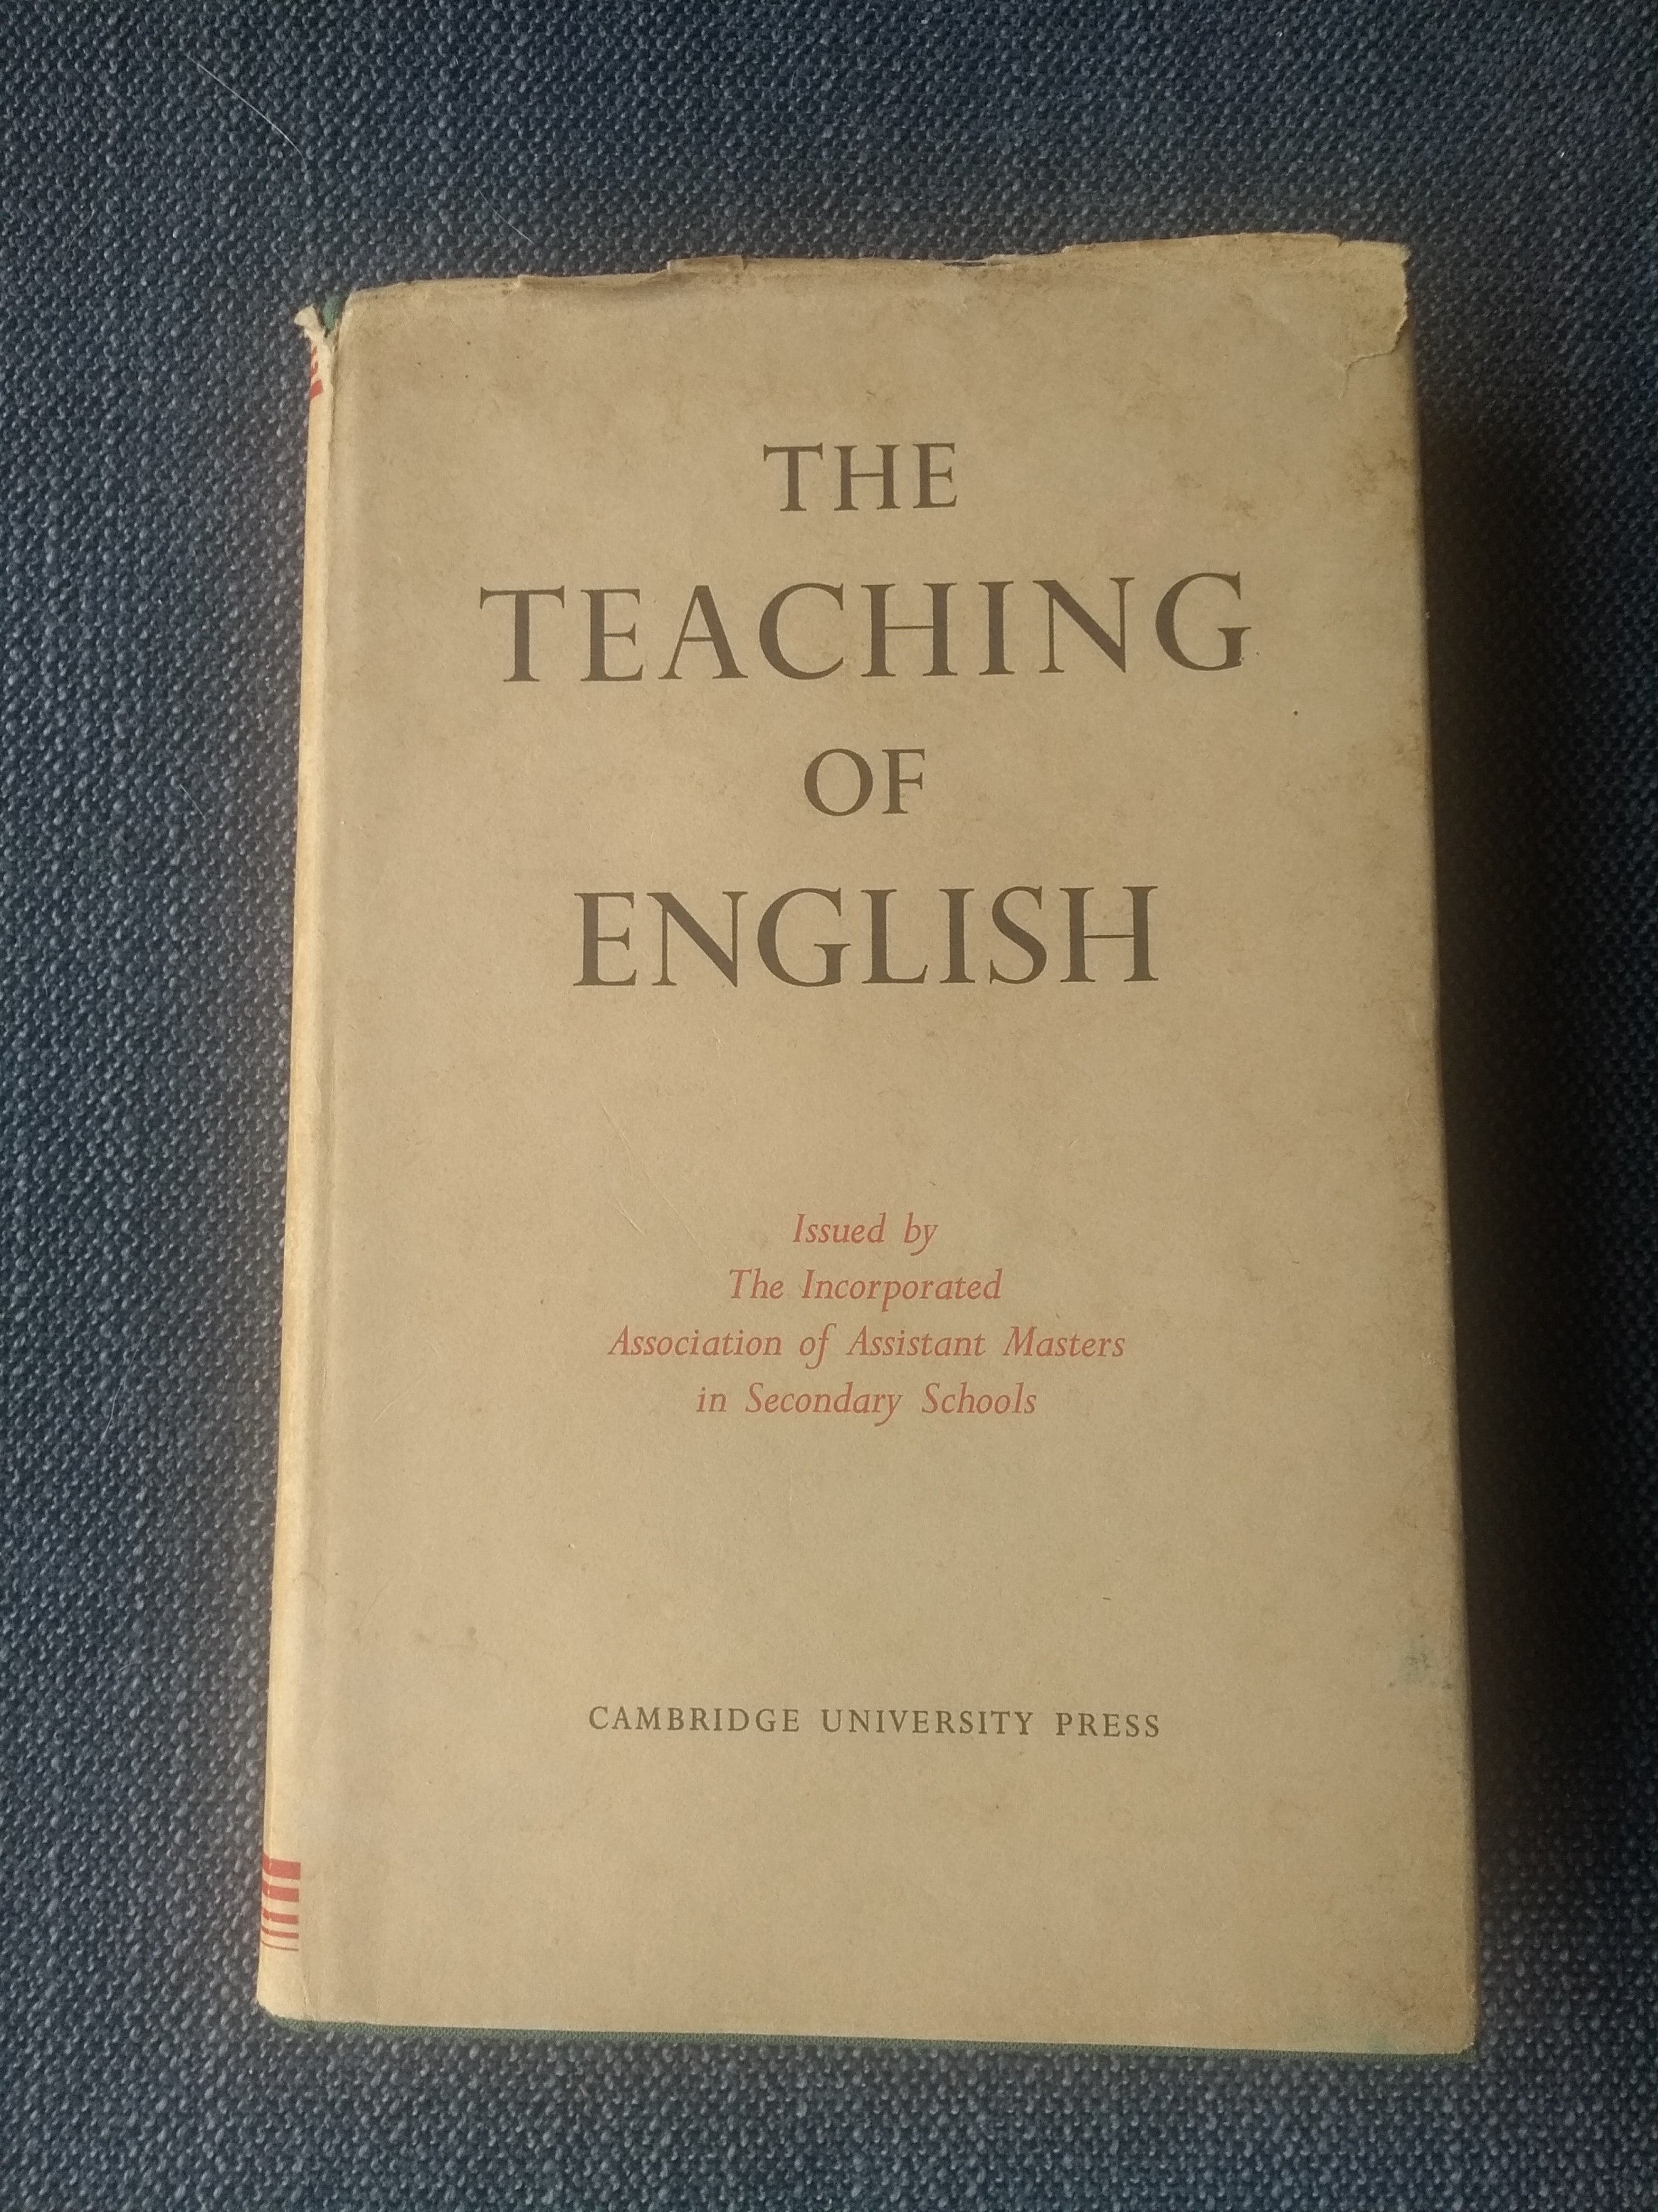 The Teaching Of English, by the Incorporated Association of Assistant Masters in Secondary Schools